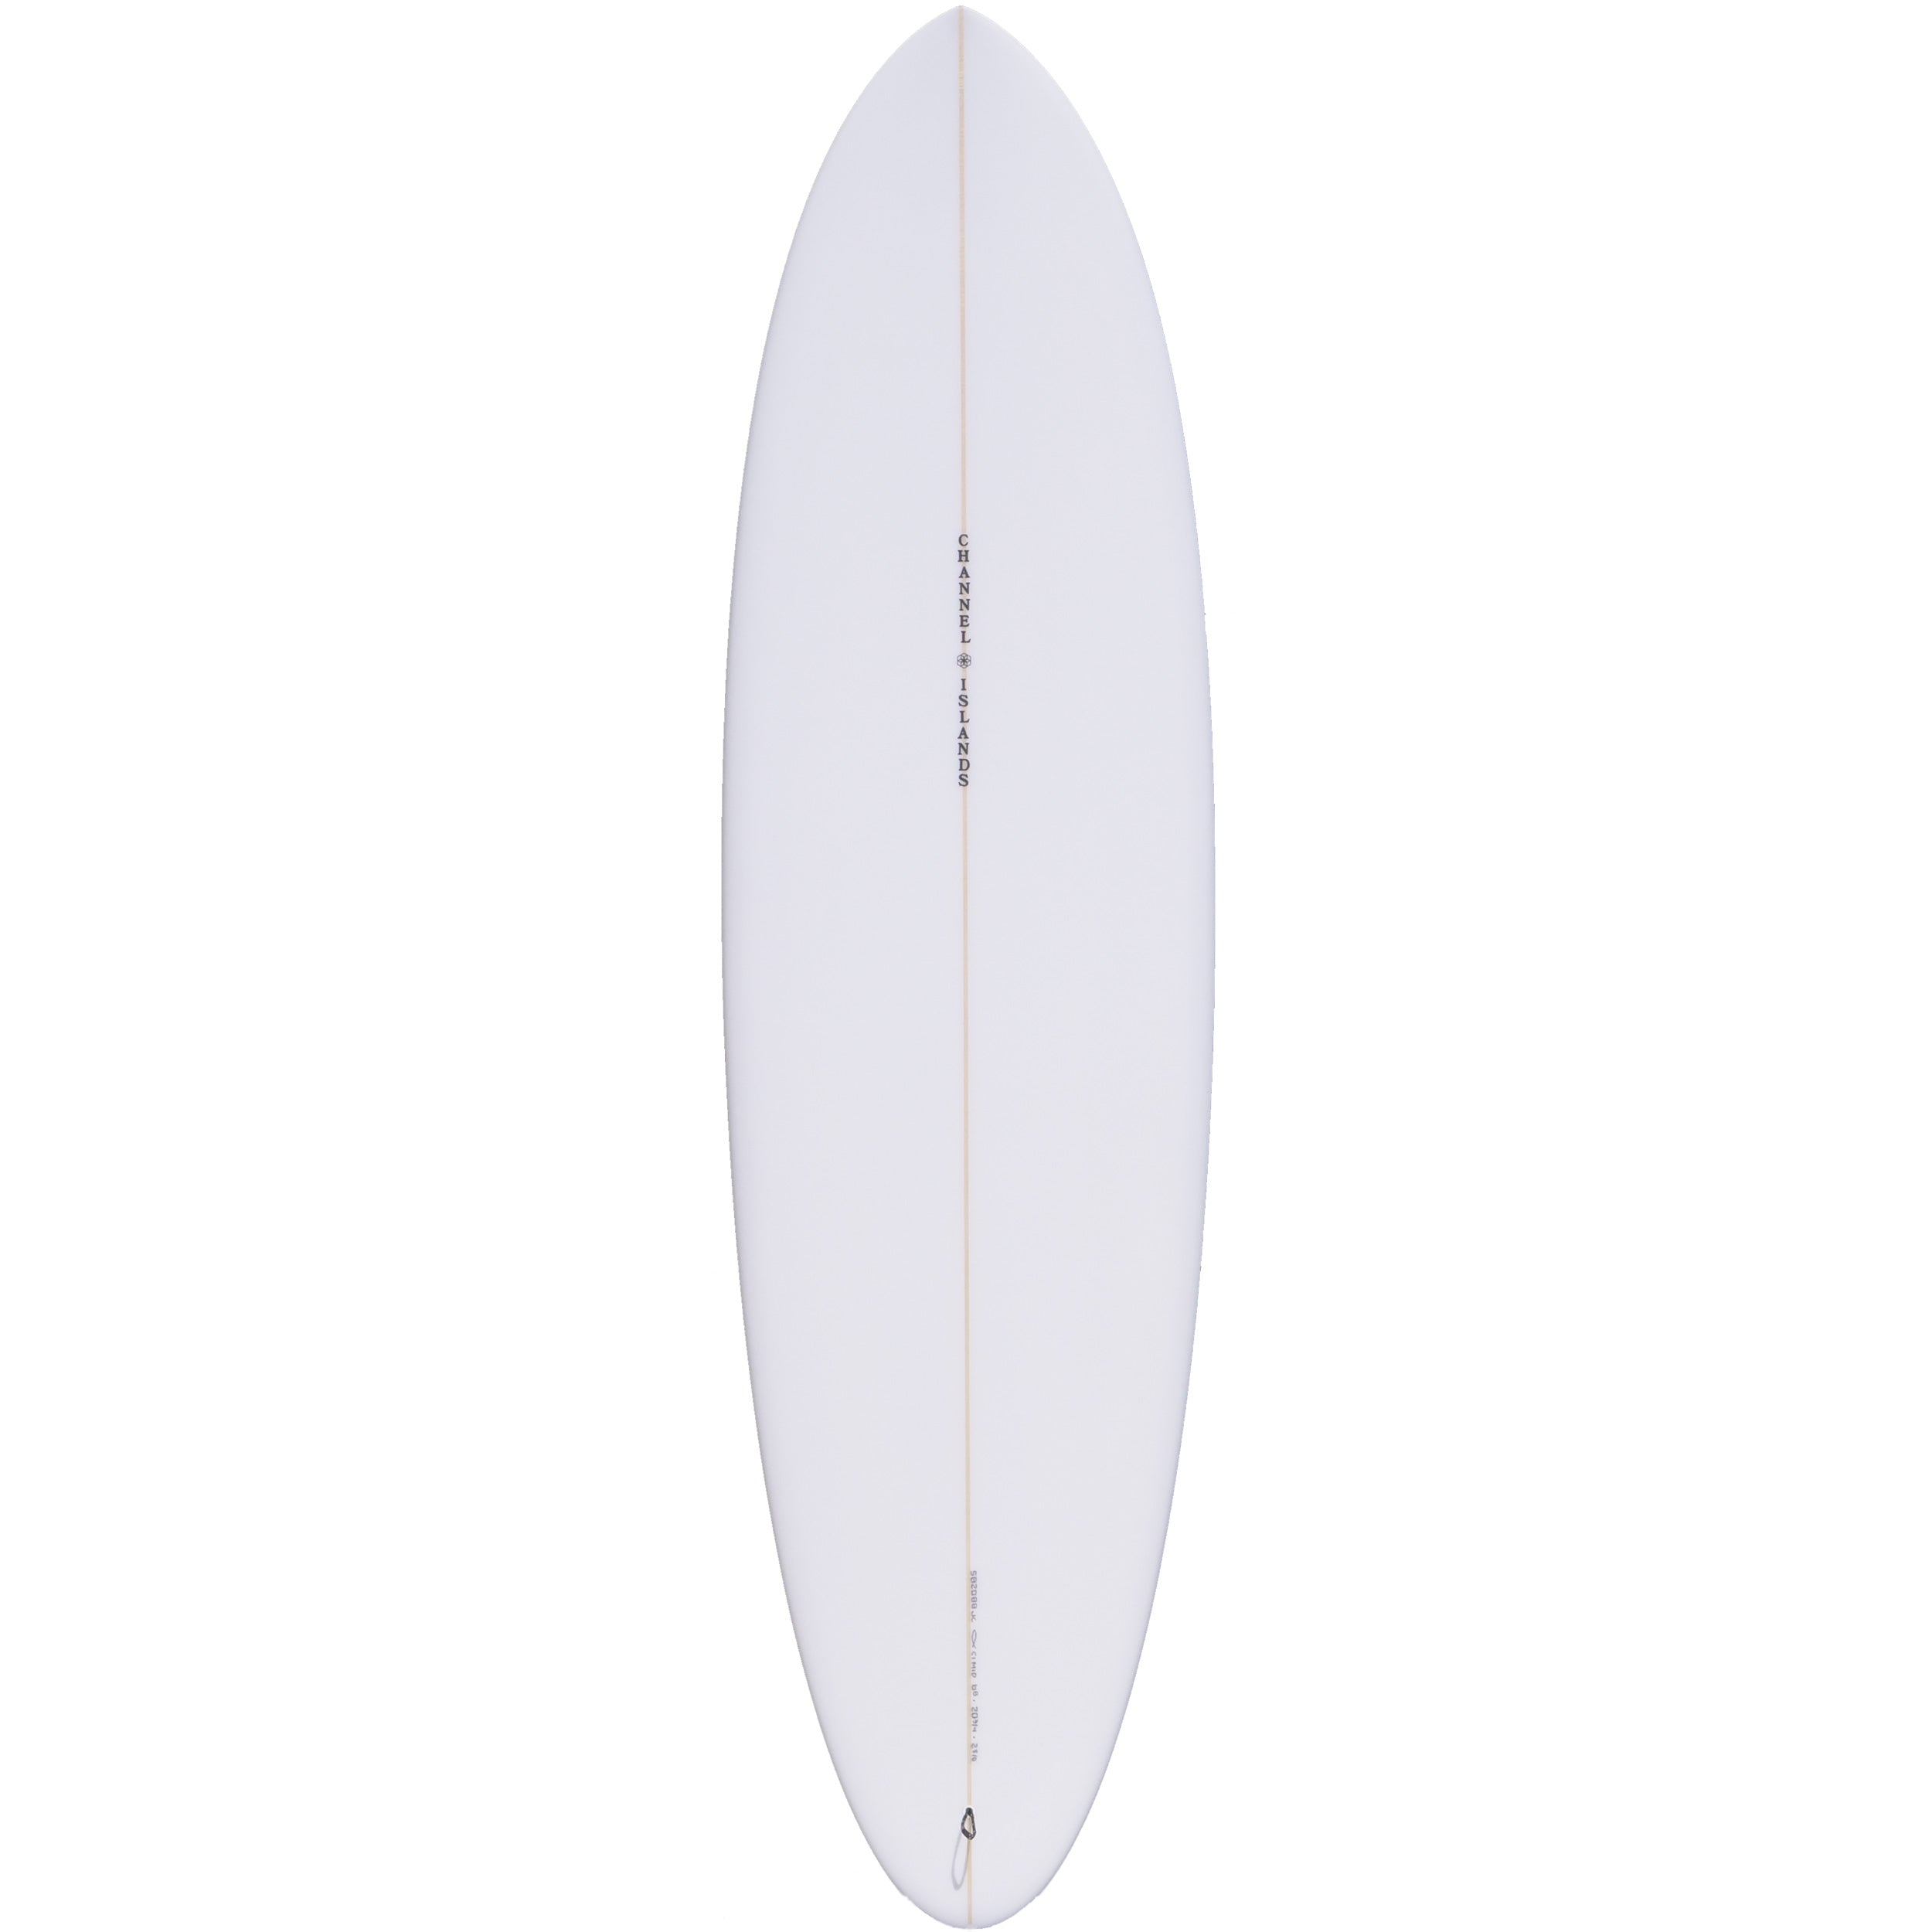 7'0 CI Mid – Channel Islands Surfboards